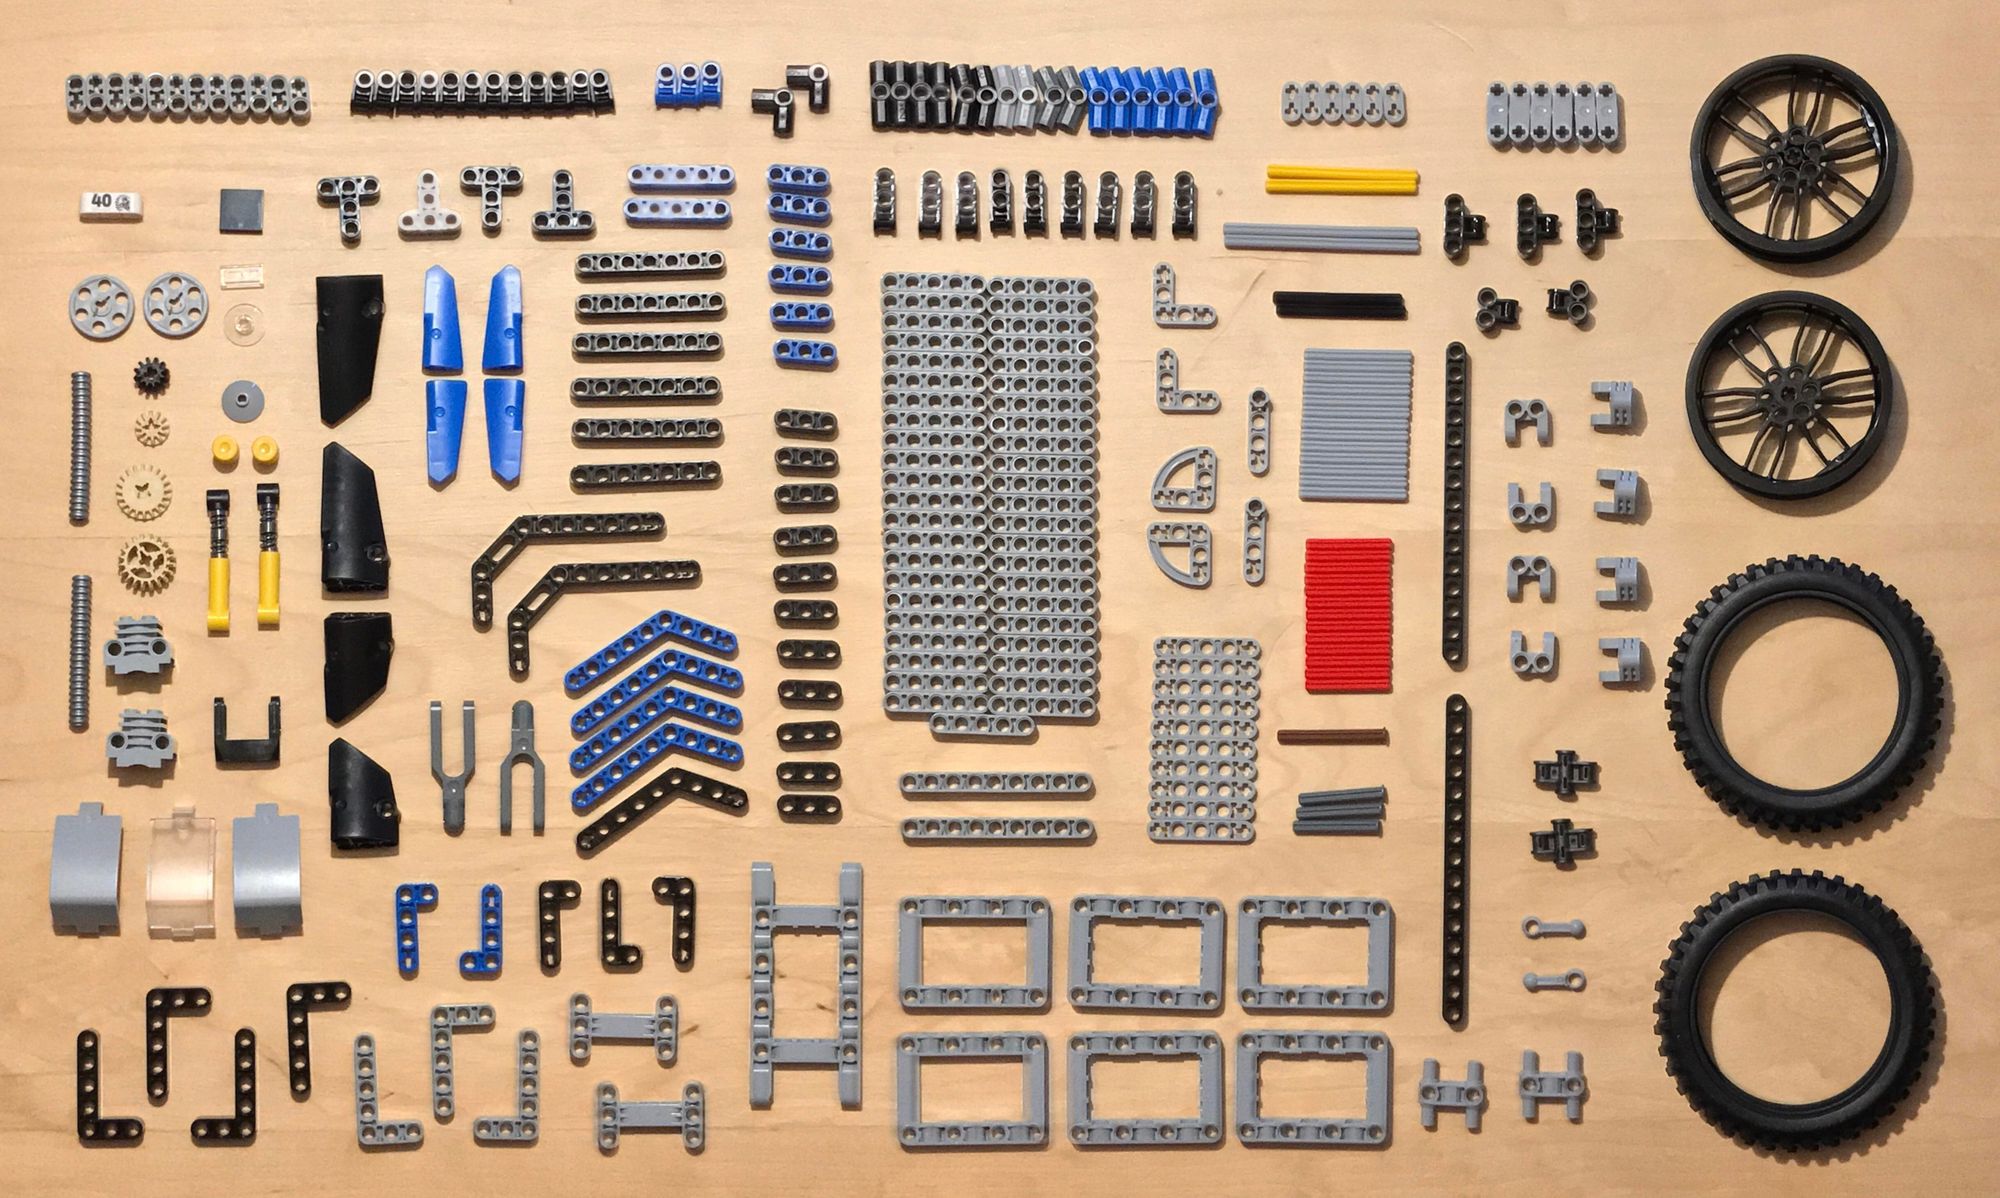 Knolling